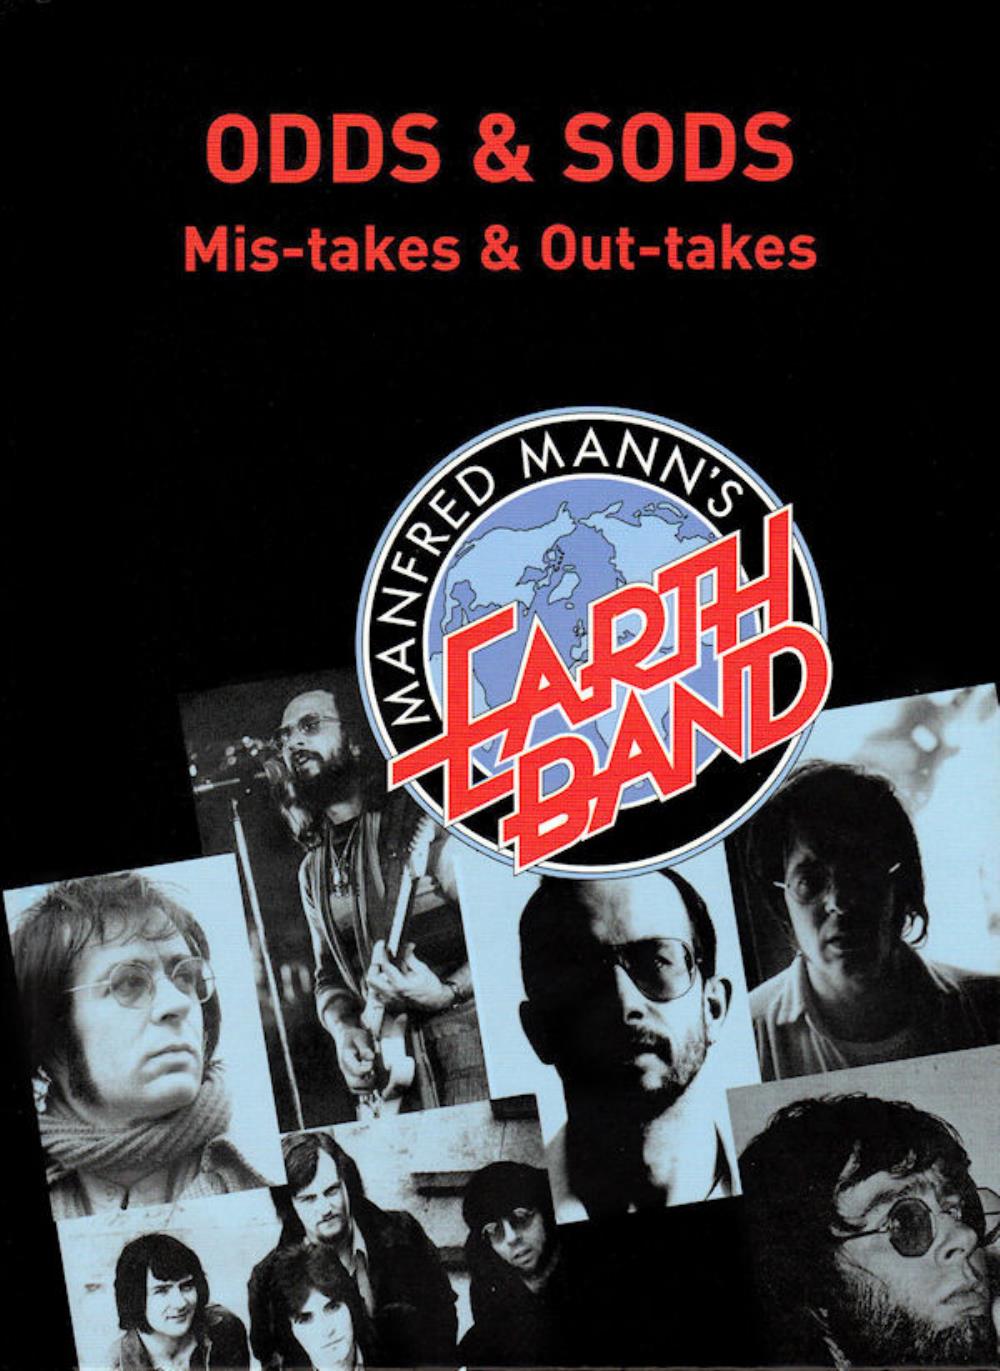 Manfred Mann's Earth Band - Odds & Sods (Mis-Takes & Out-Takes) CD (album) cover